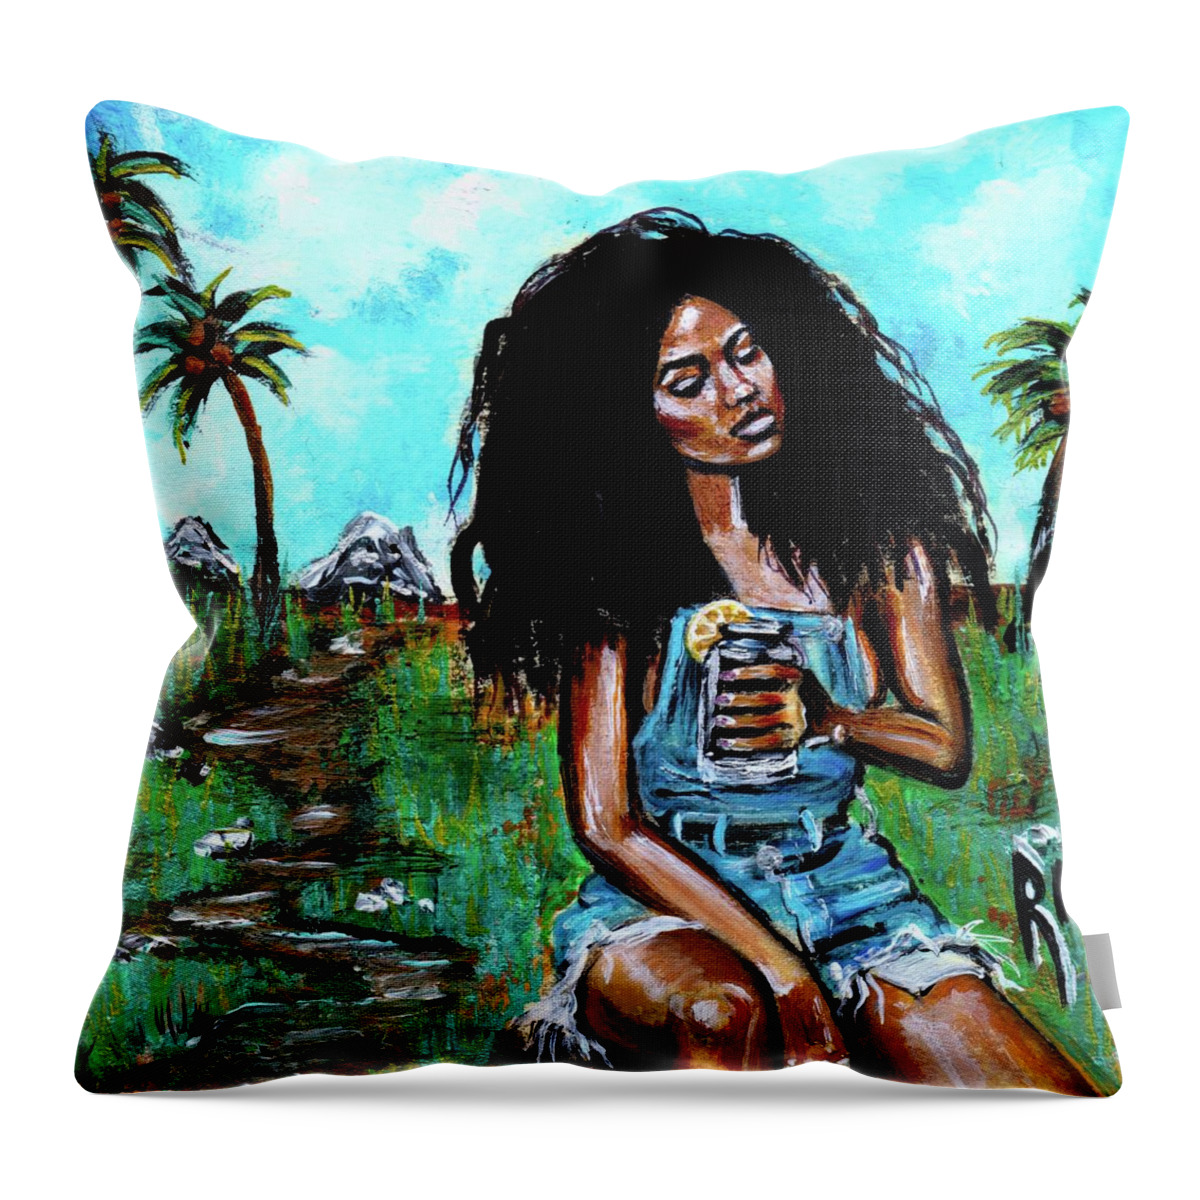  Throw Pillow featuring the painting Moments of Bliss by Artist RiA